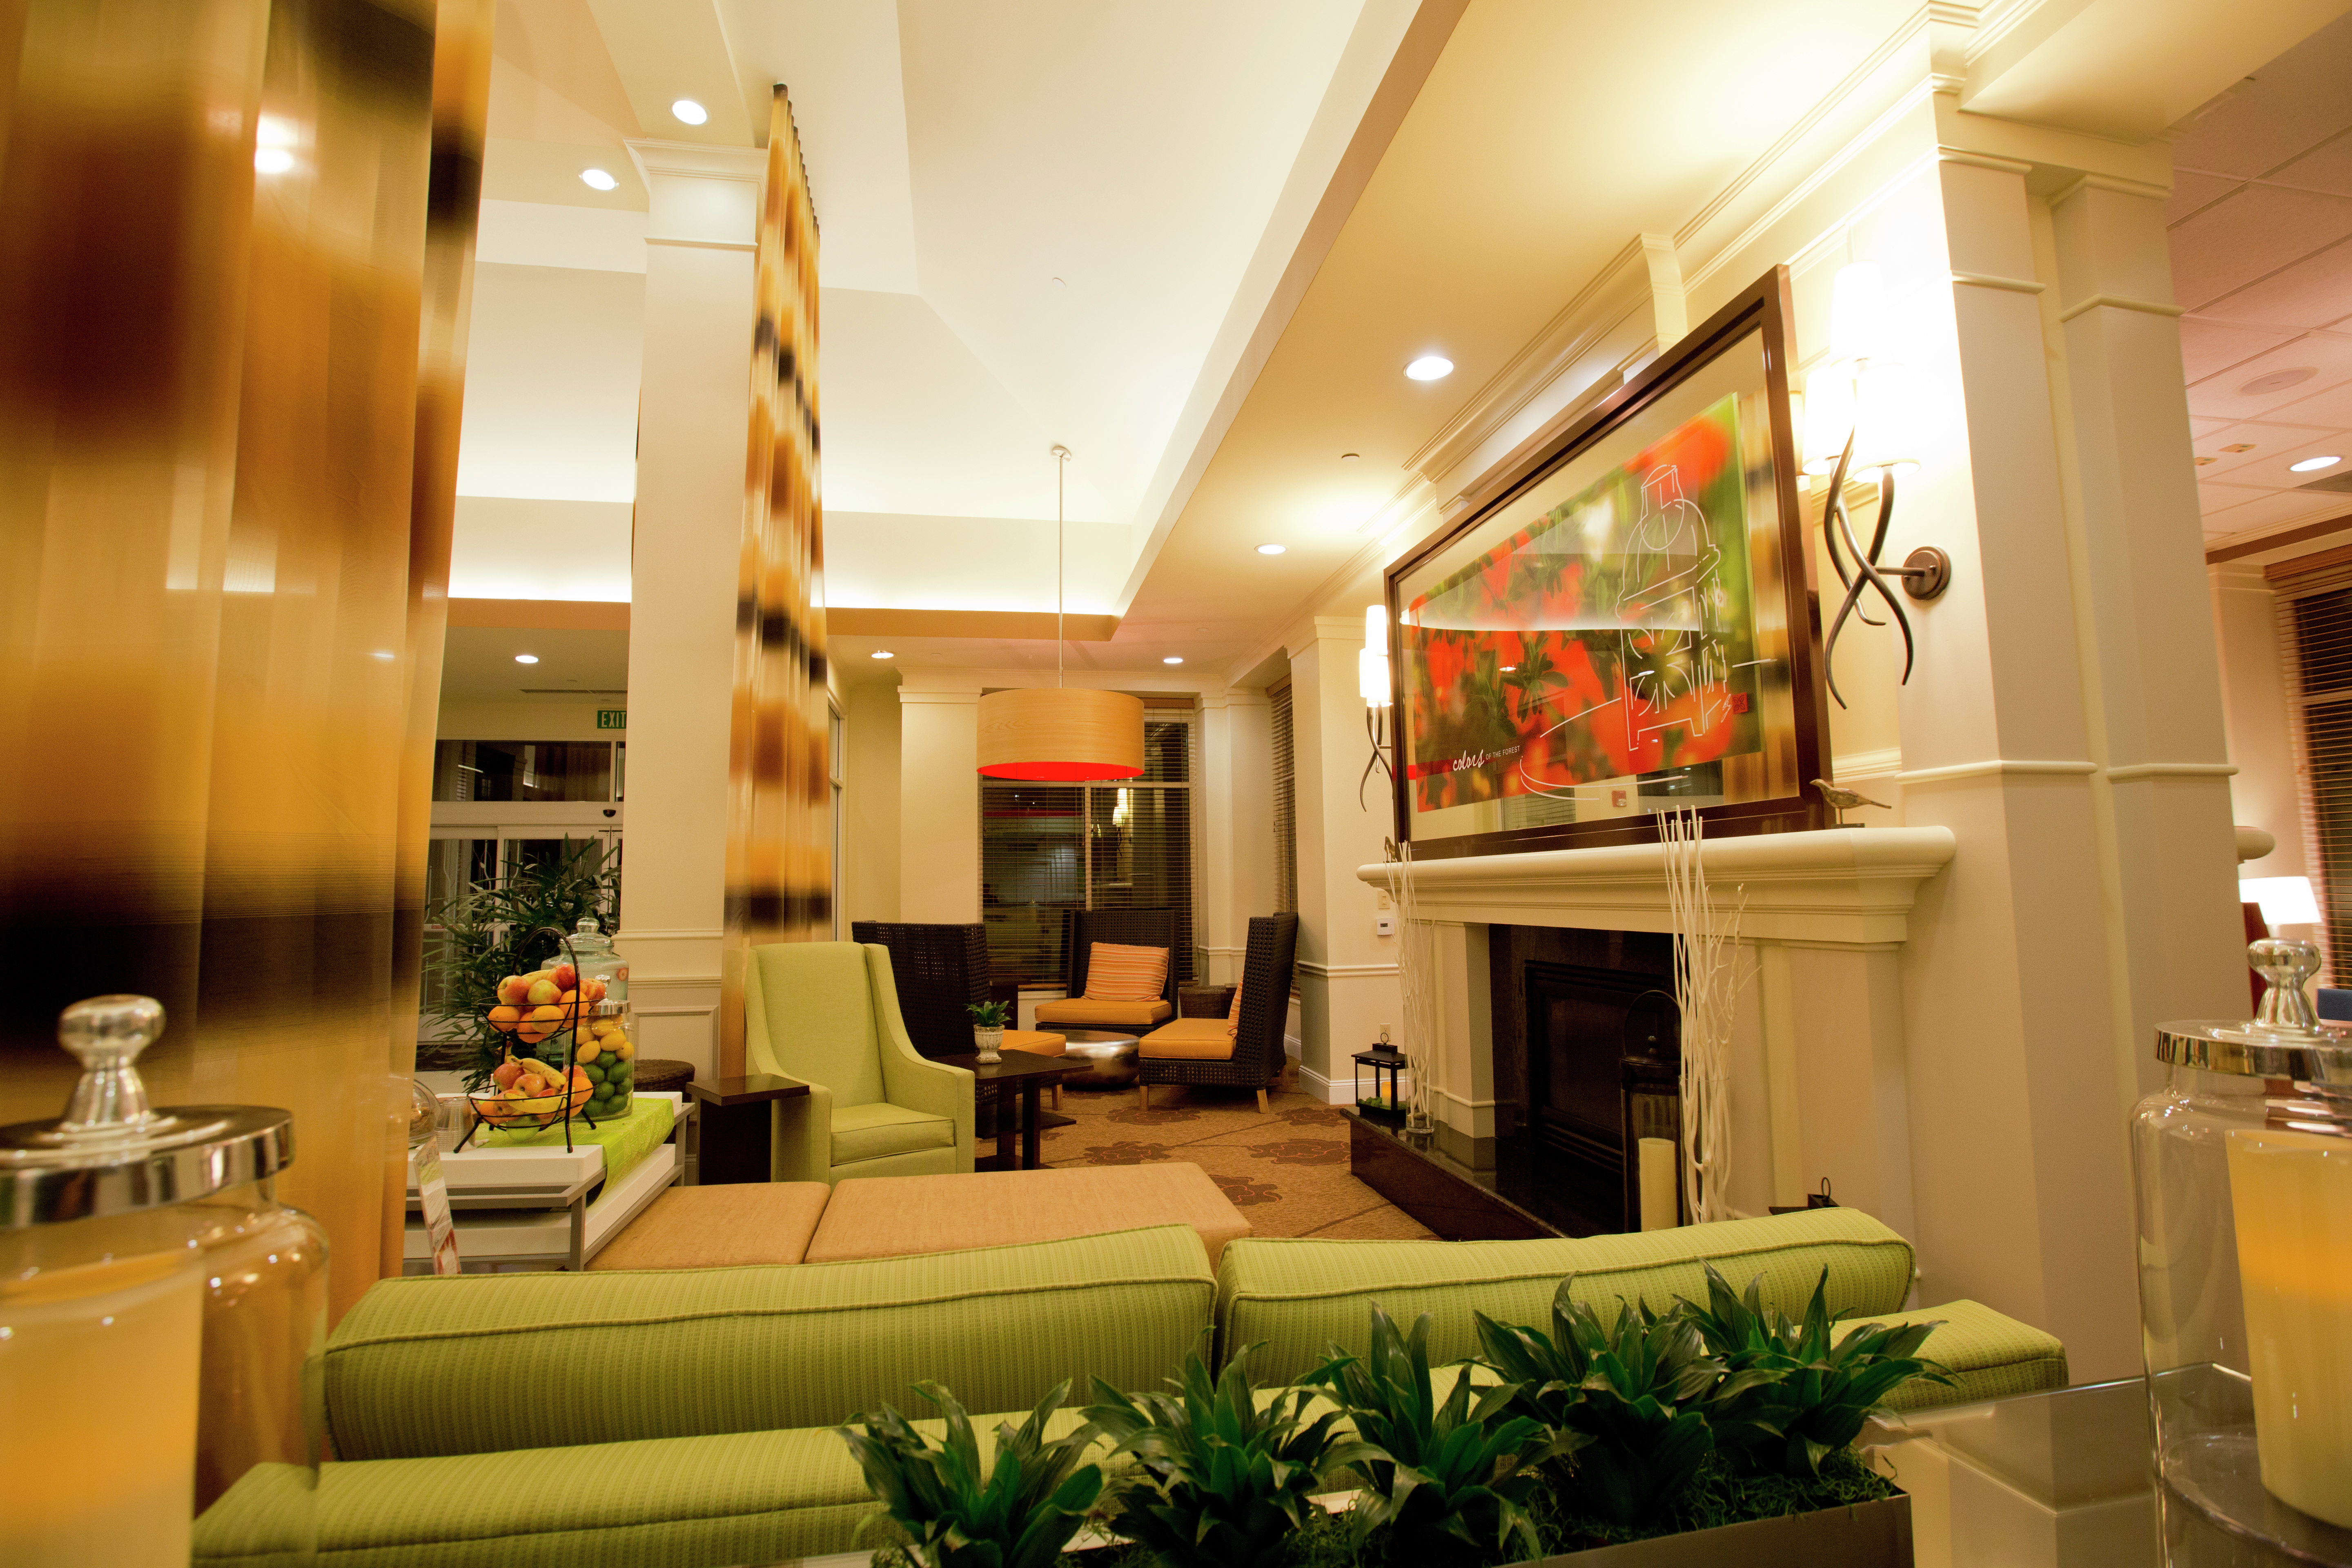 Long Drapes, Soft Seating, and Fireplace in Lobby Lounge Area